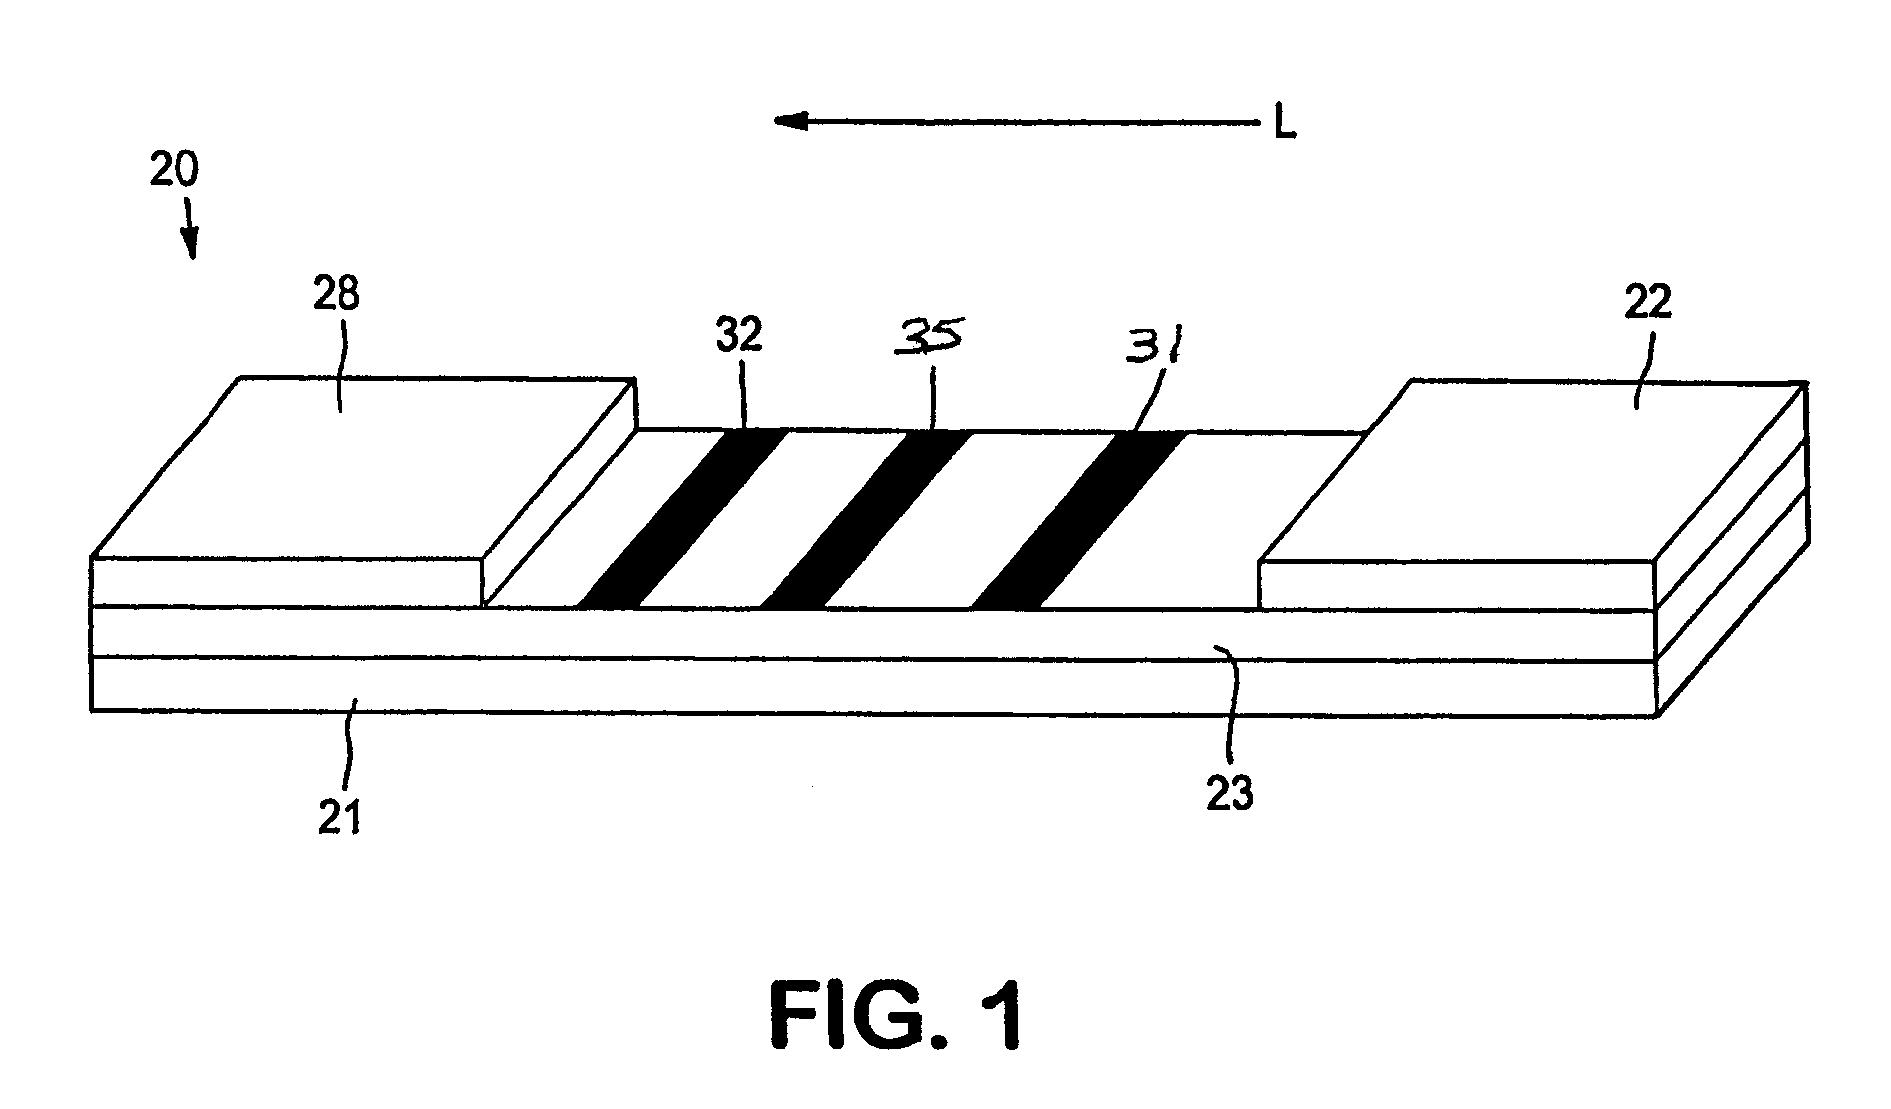 Assay devices having detection capabilities within the hook effect region